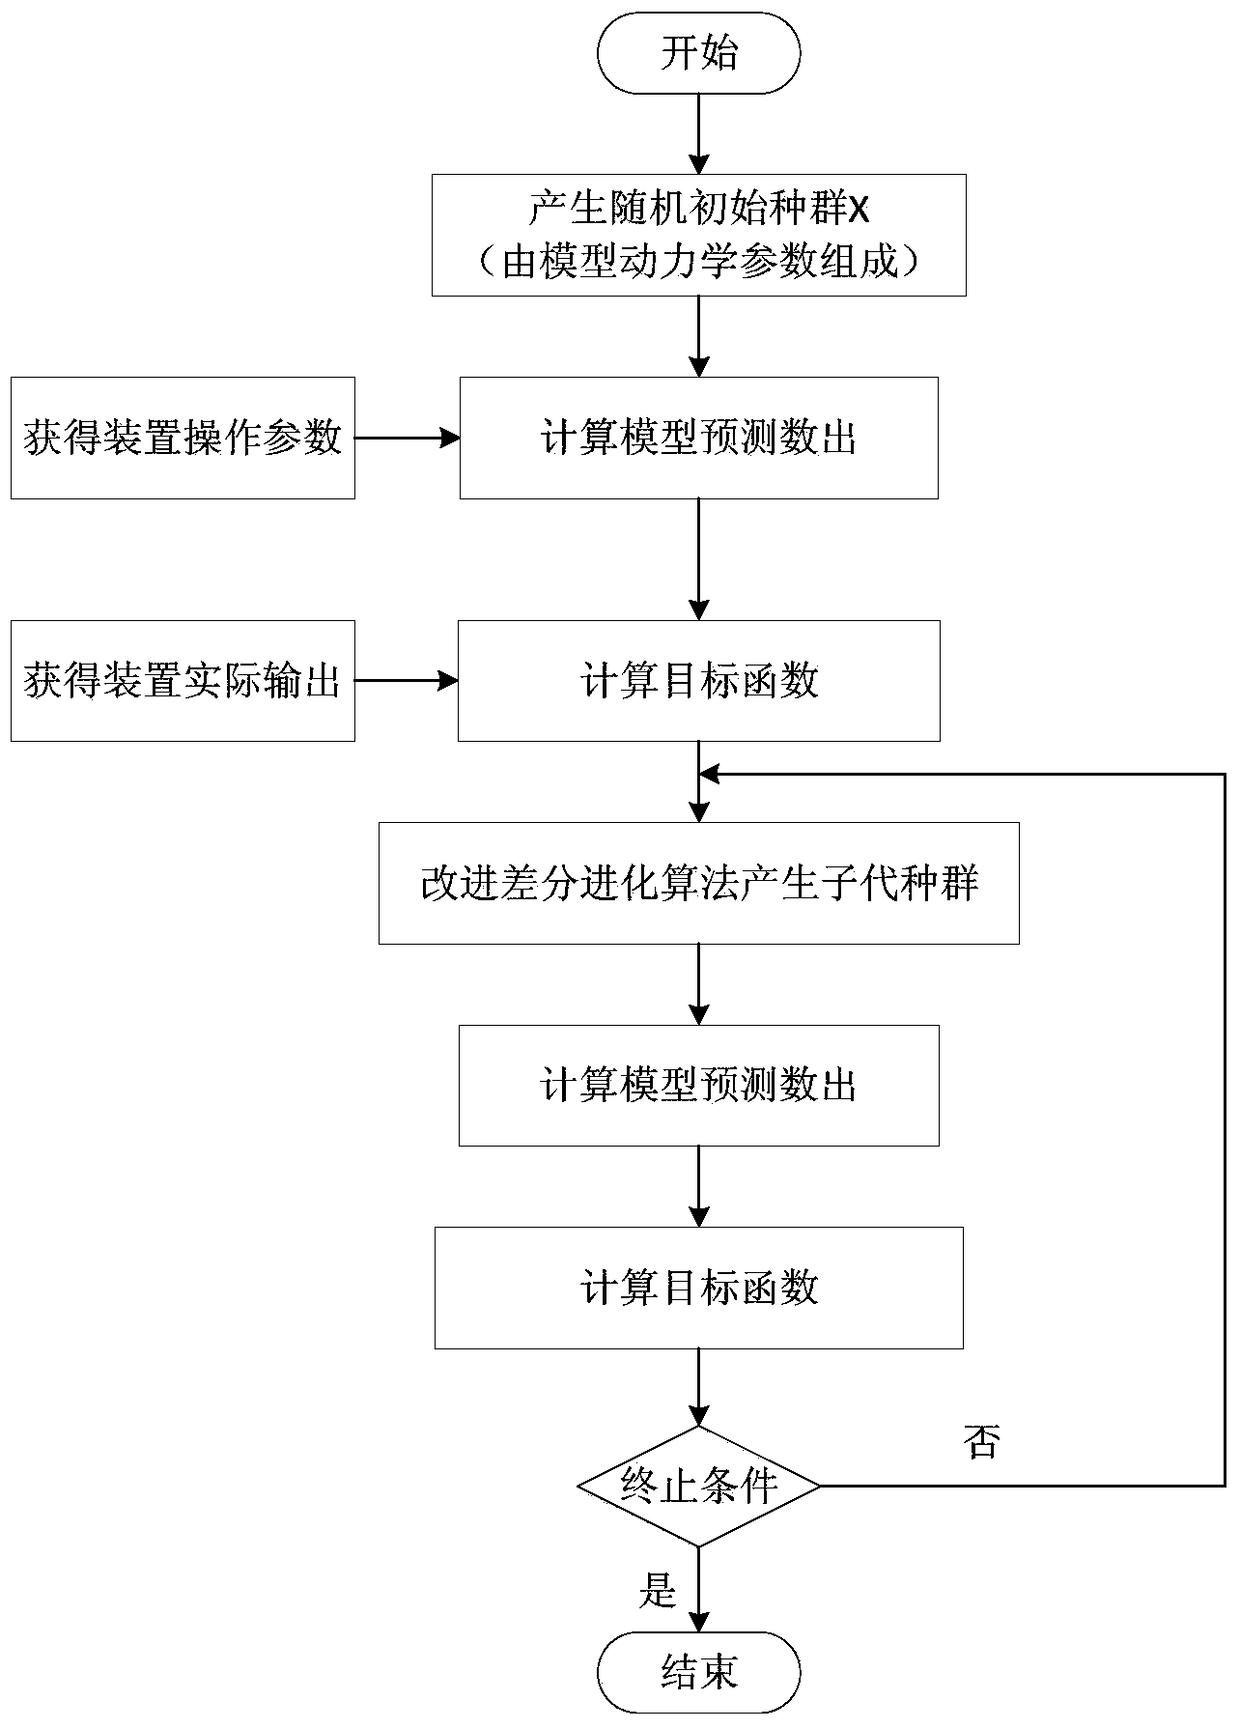 A Whole-flow Modeling Method of Oil Refining Process